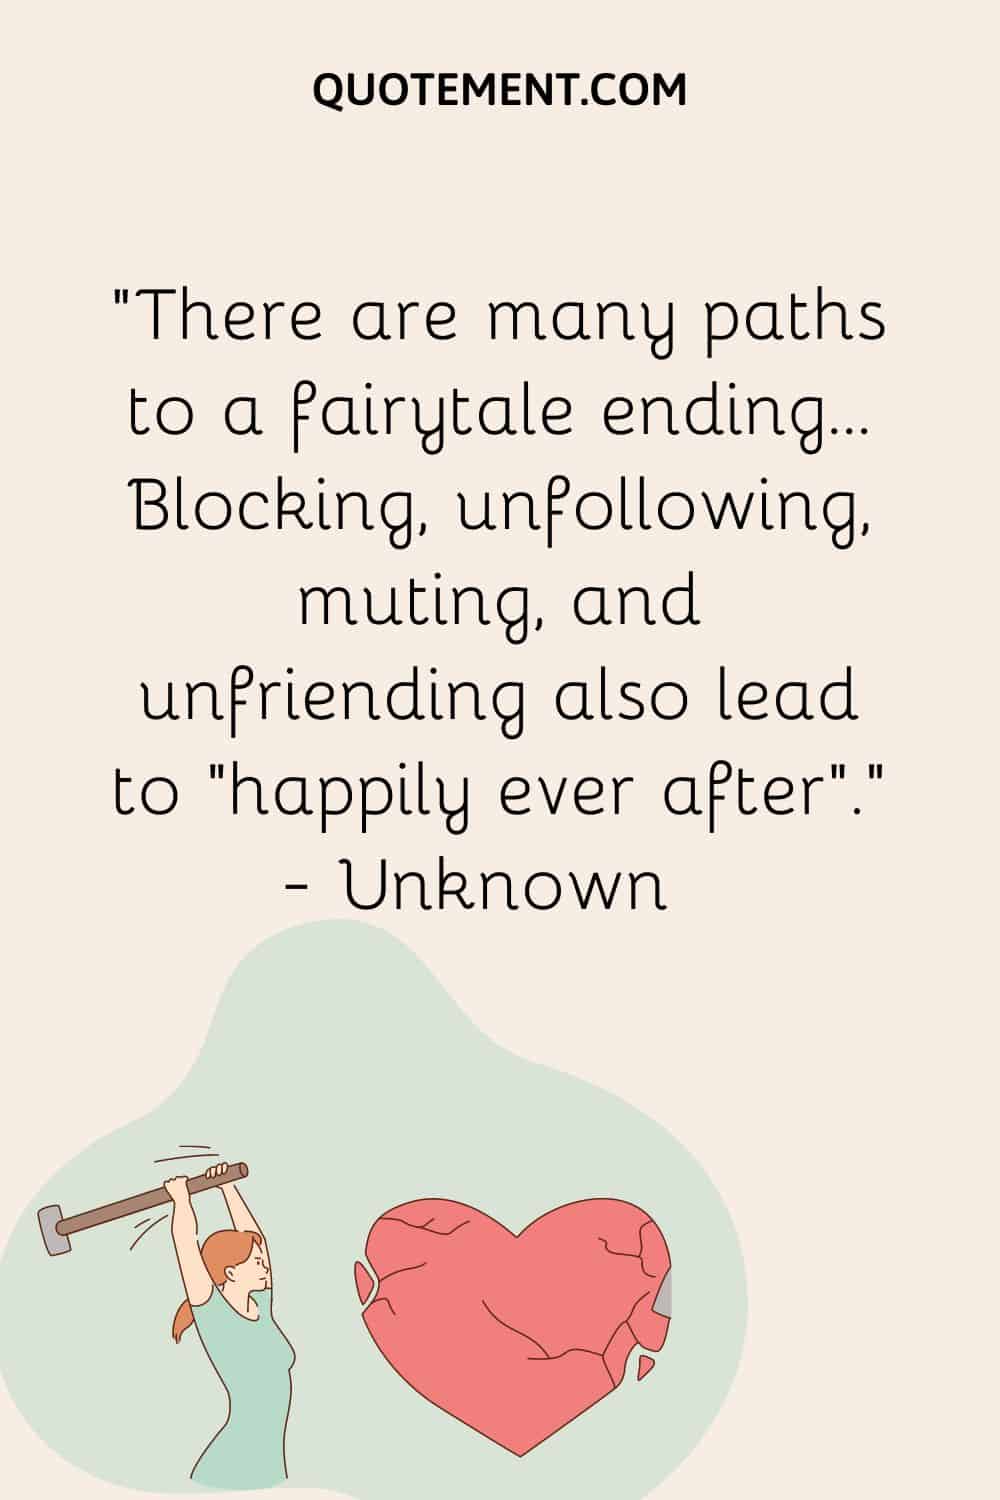 There are many paths to a fairytale ending